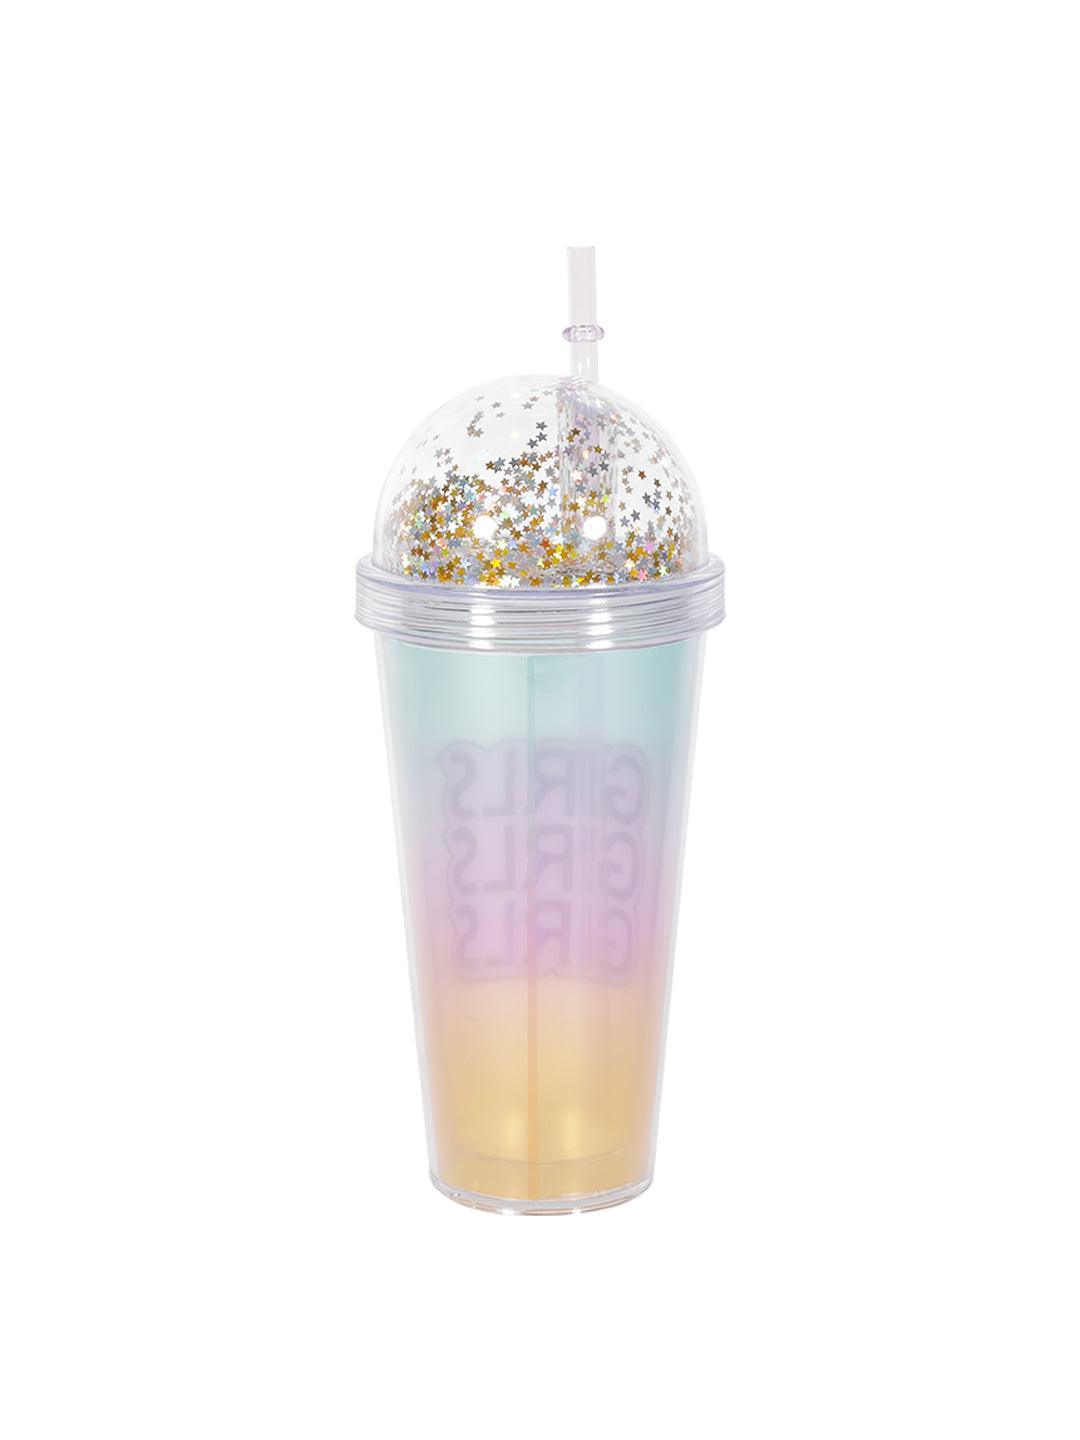 Market99 380Ml Plastic Tumbler With Straw And Lid - MARKET 99